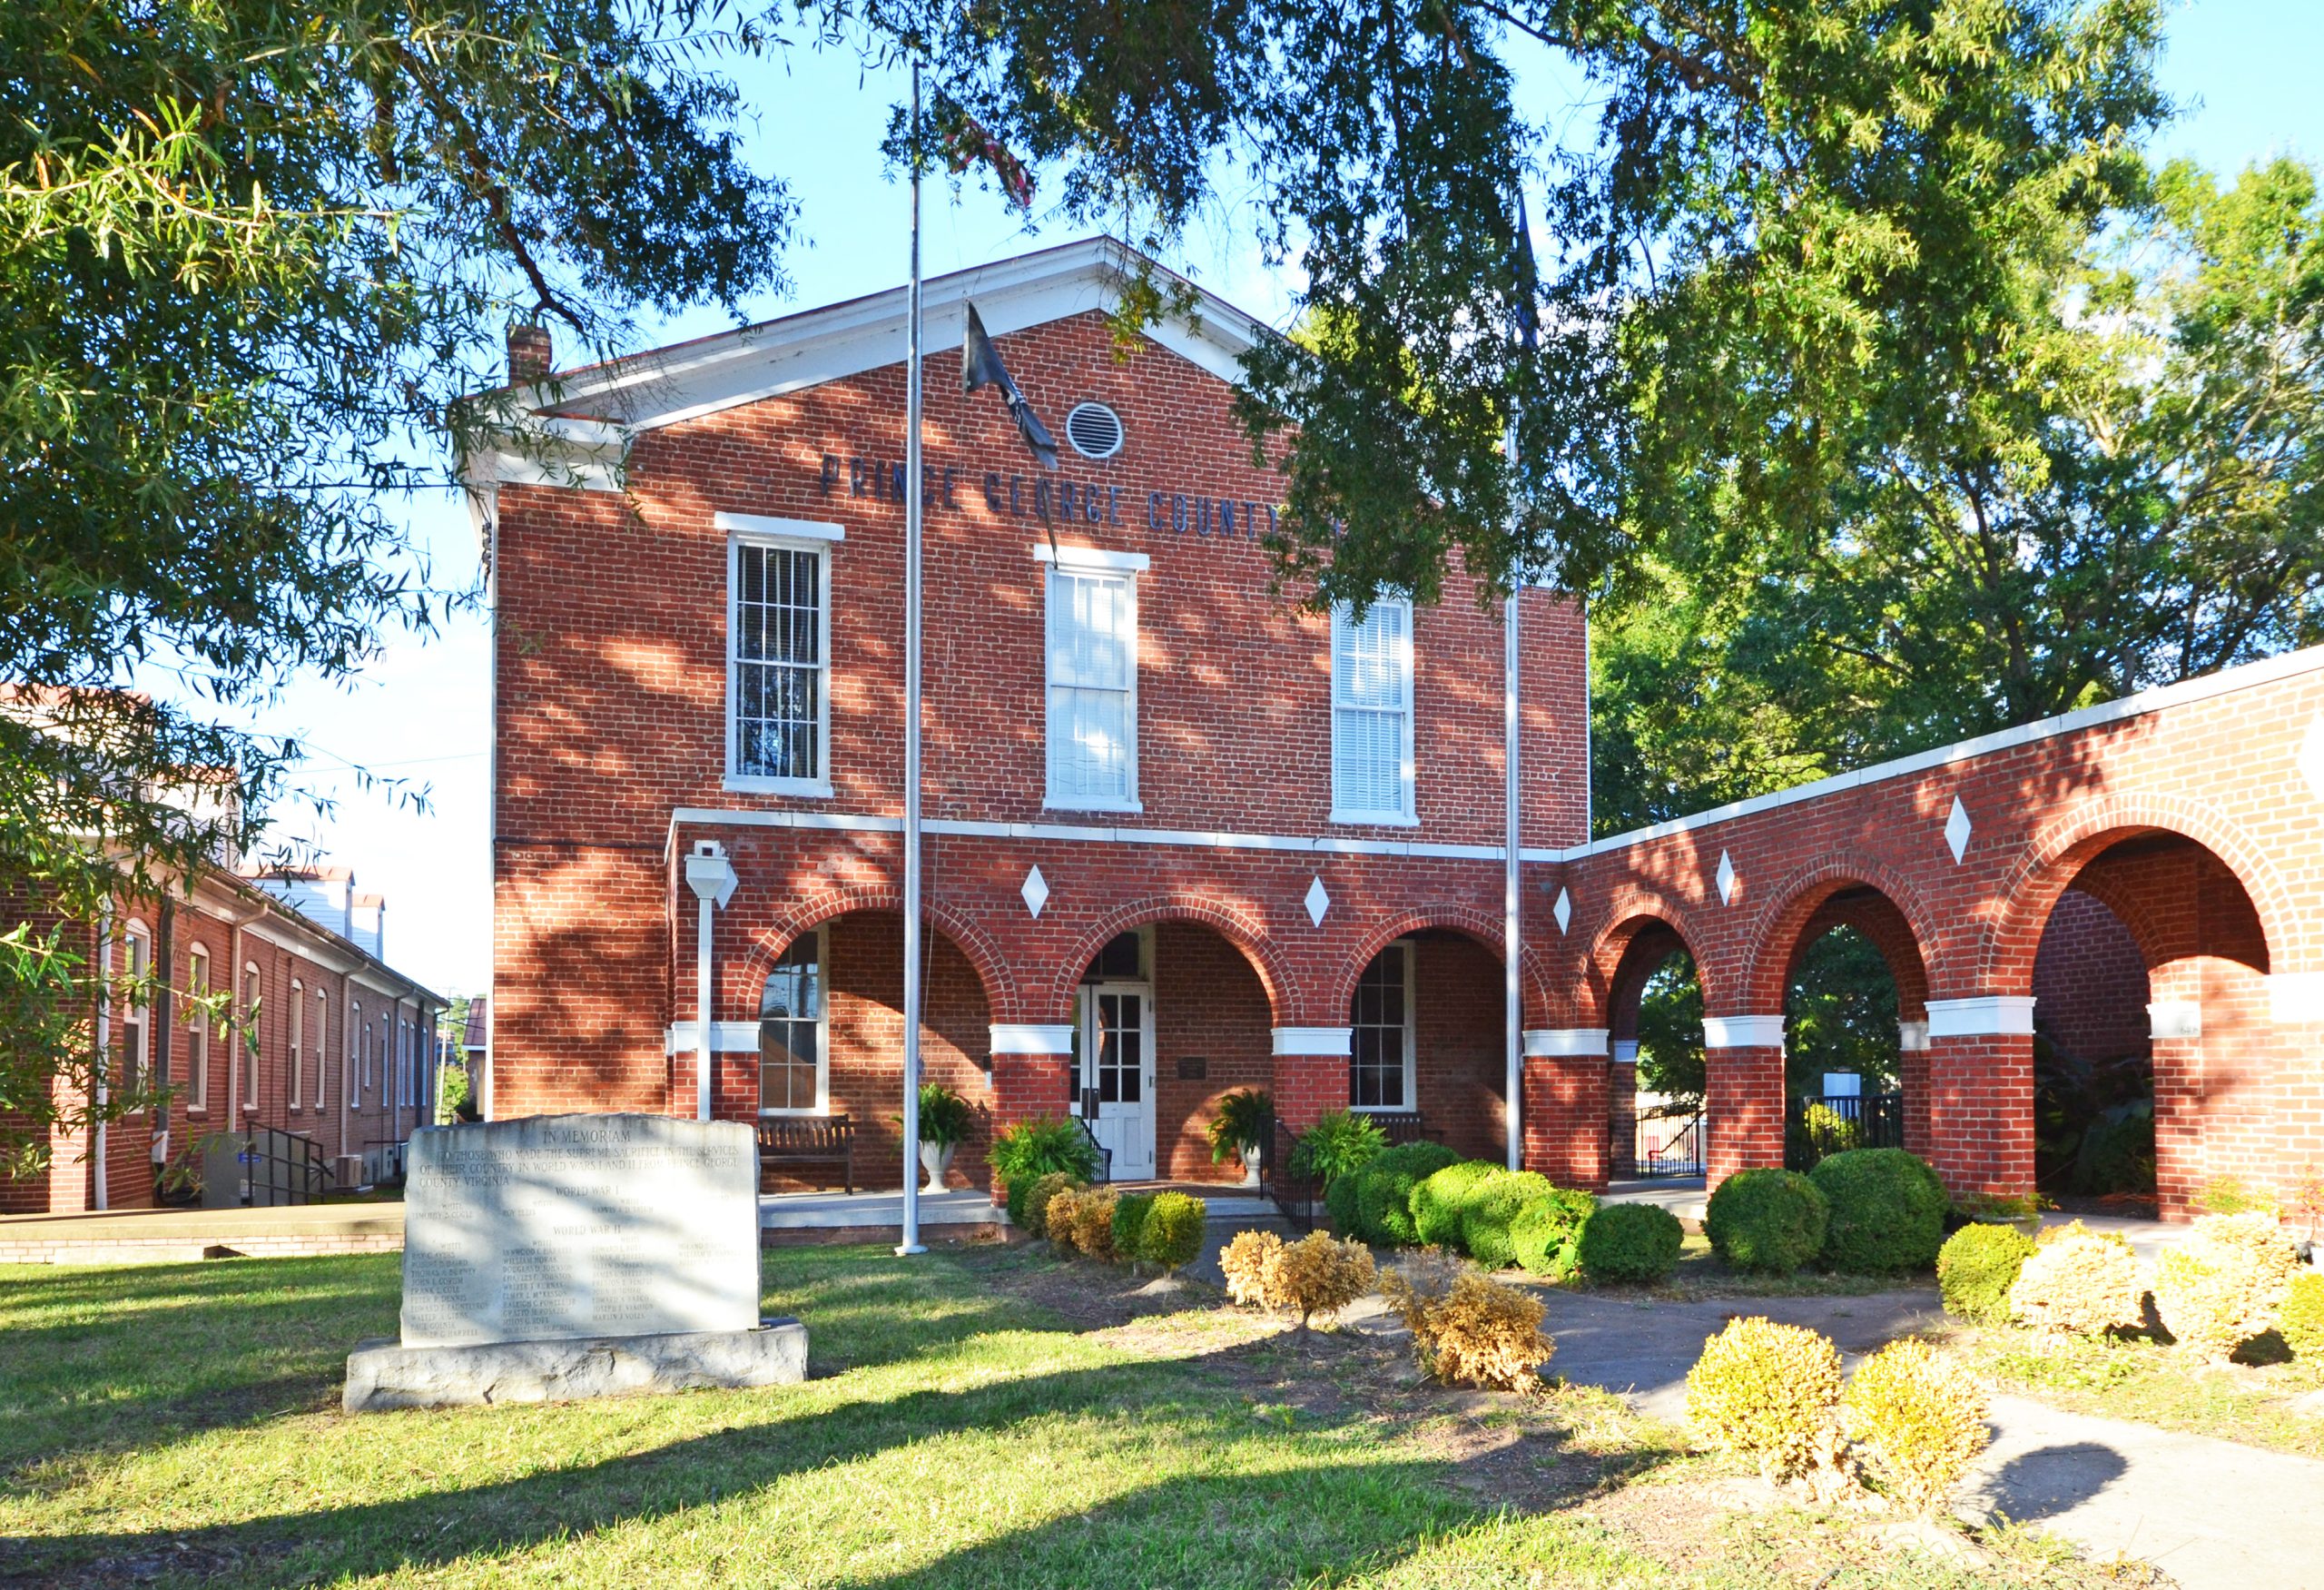 Prince George County Courthouse Historic District